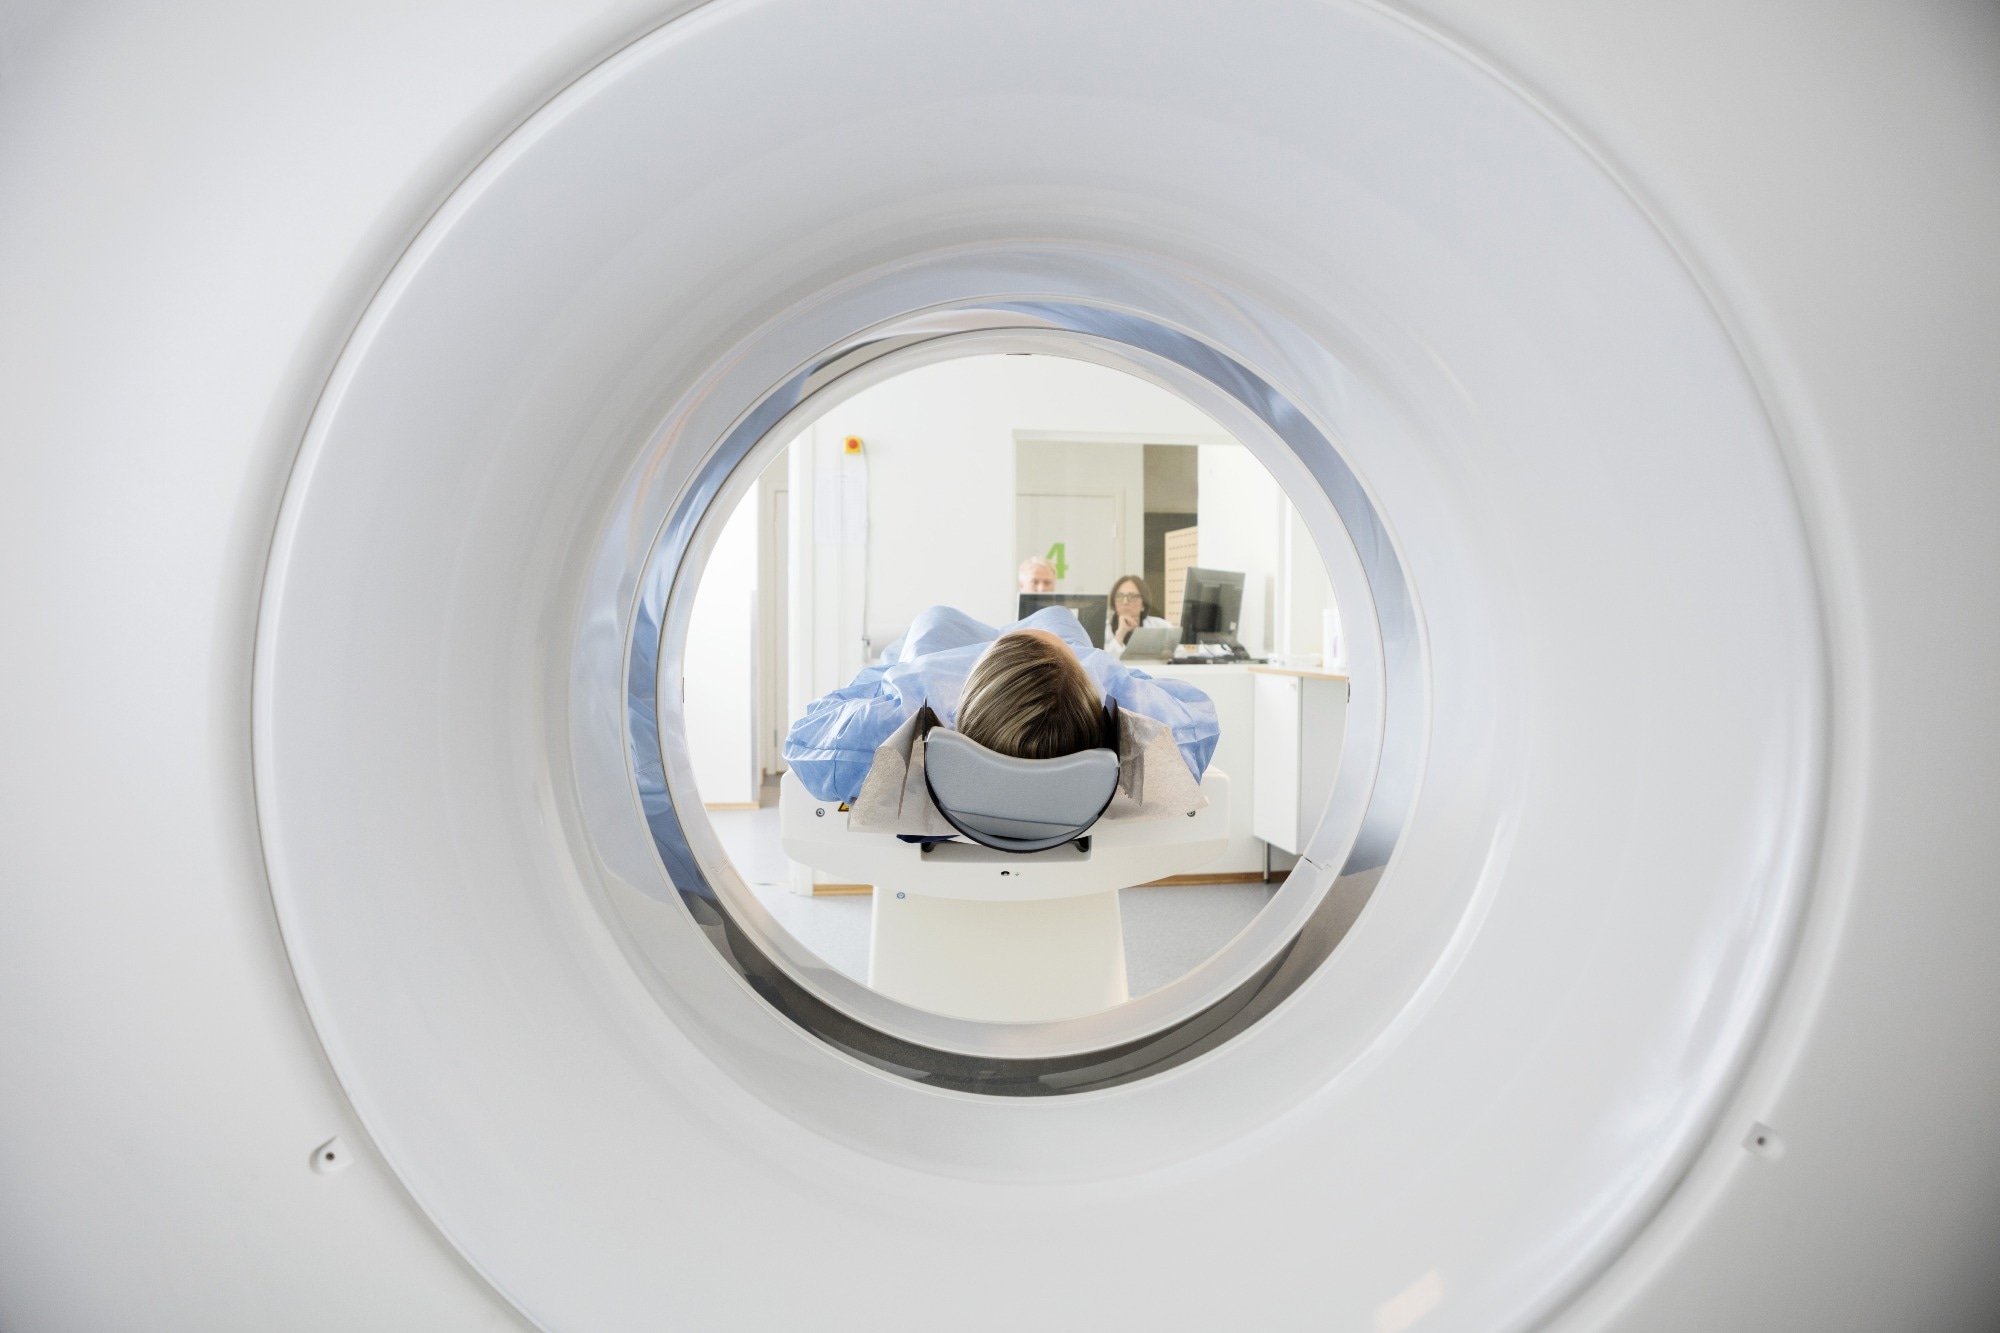 Study: Development and validation of chest CT-based imaging biomarkers for early stage COVID-19 screening. Image Credit: Tyler Olson/Shutterstock